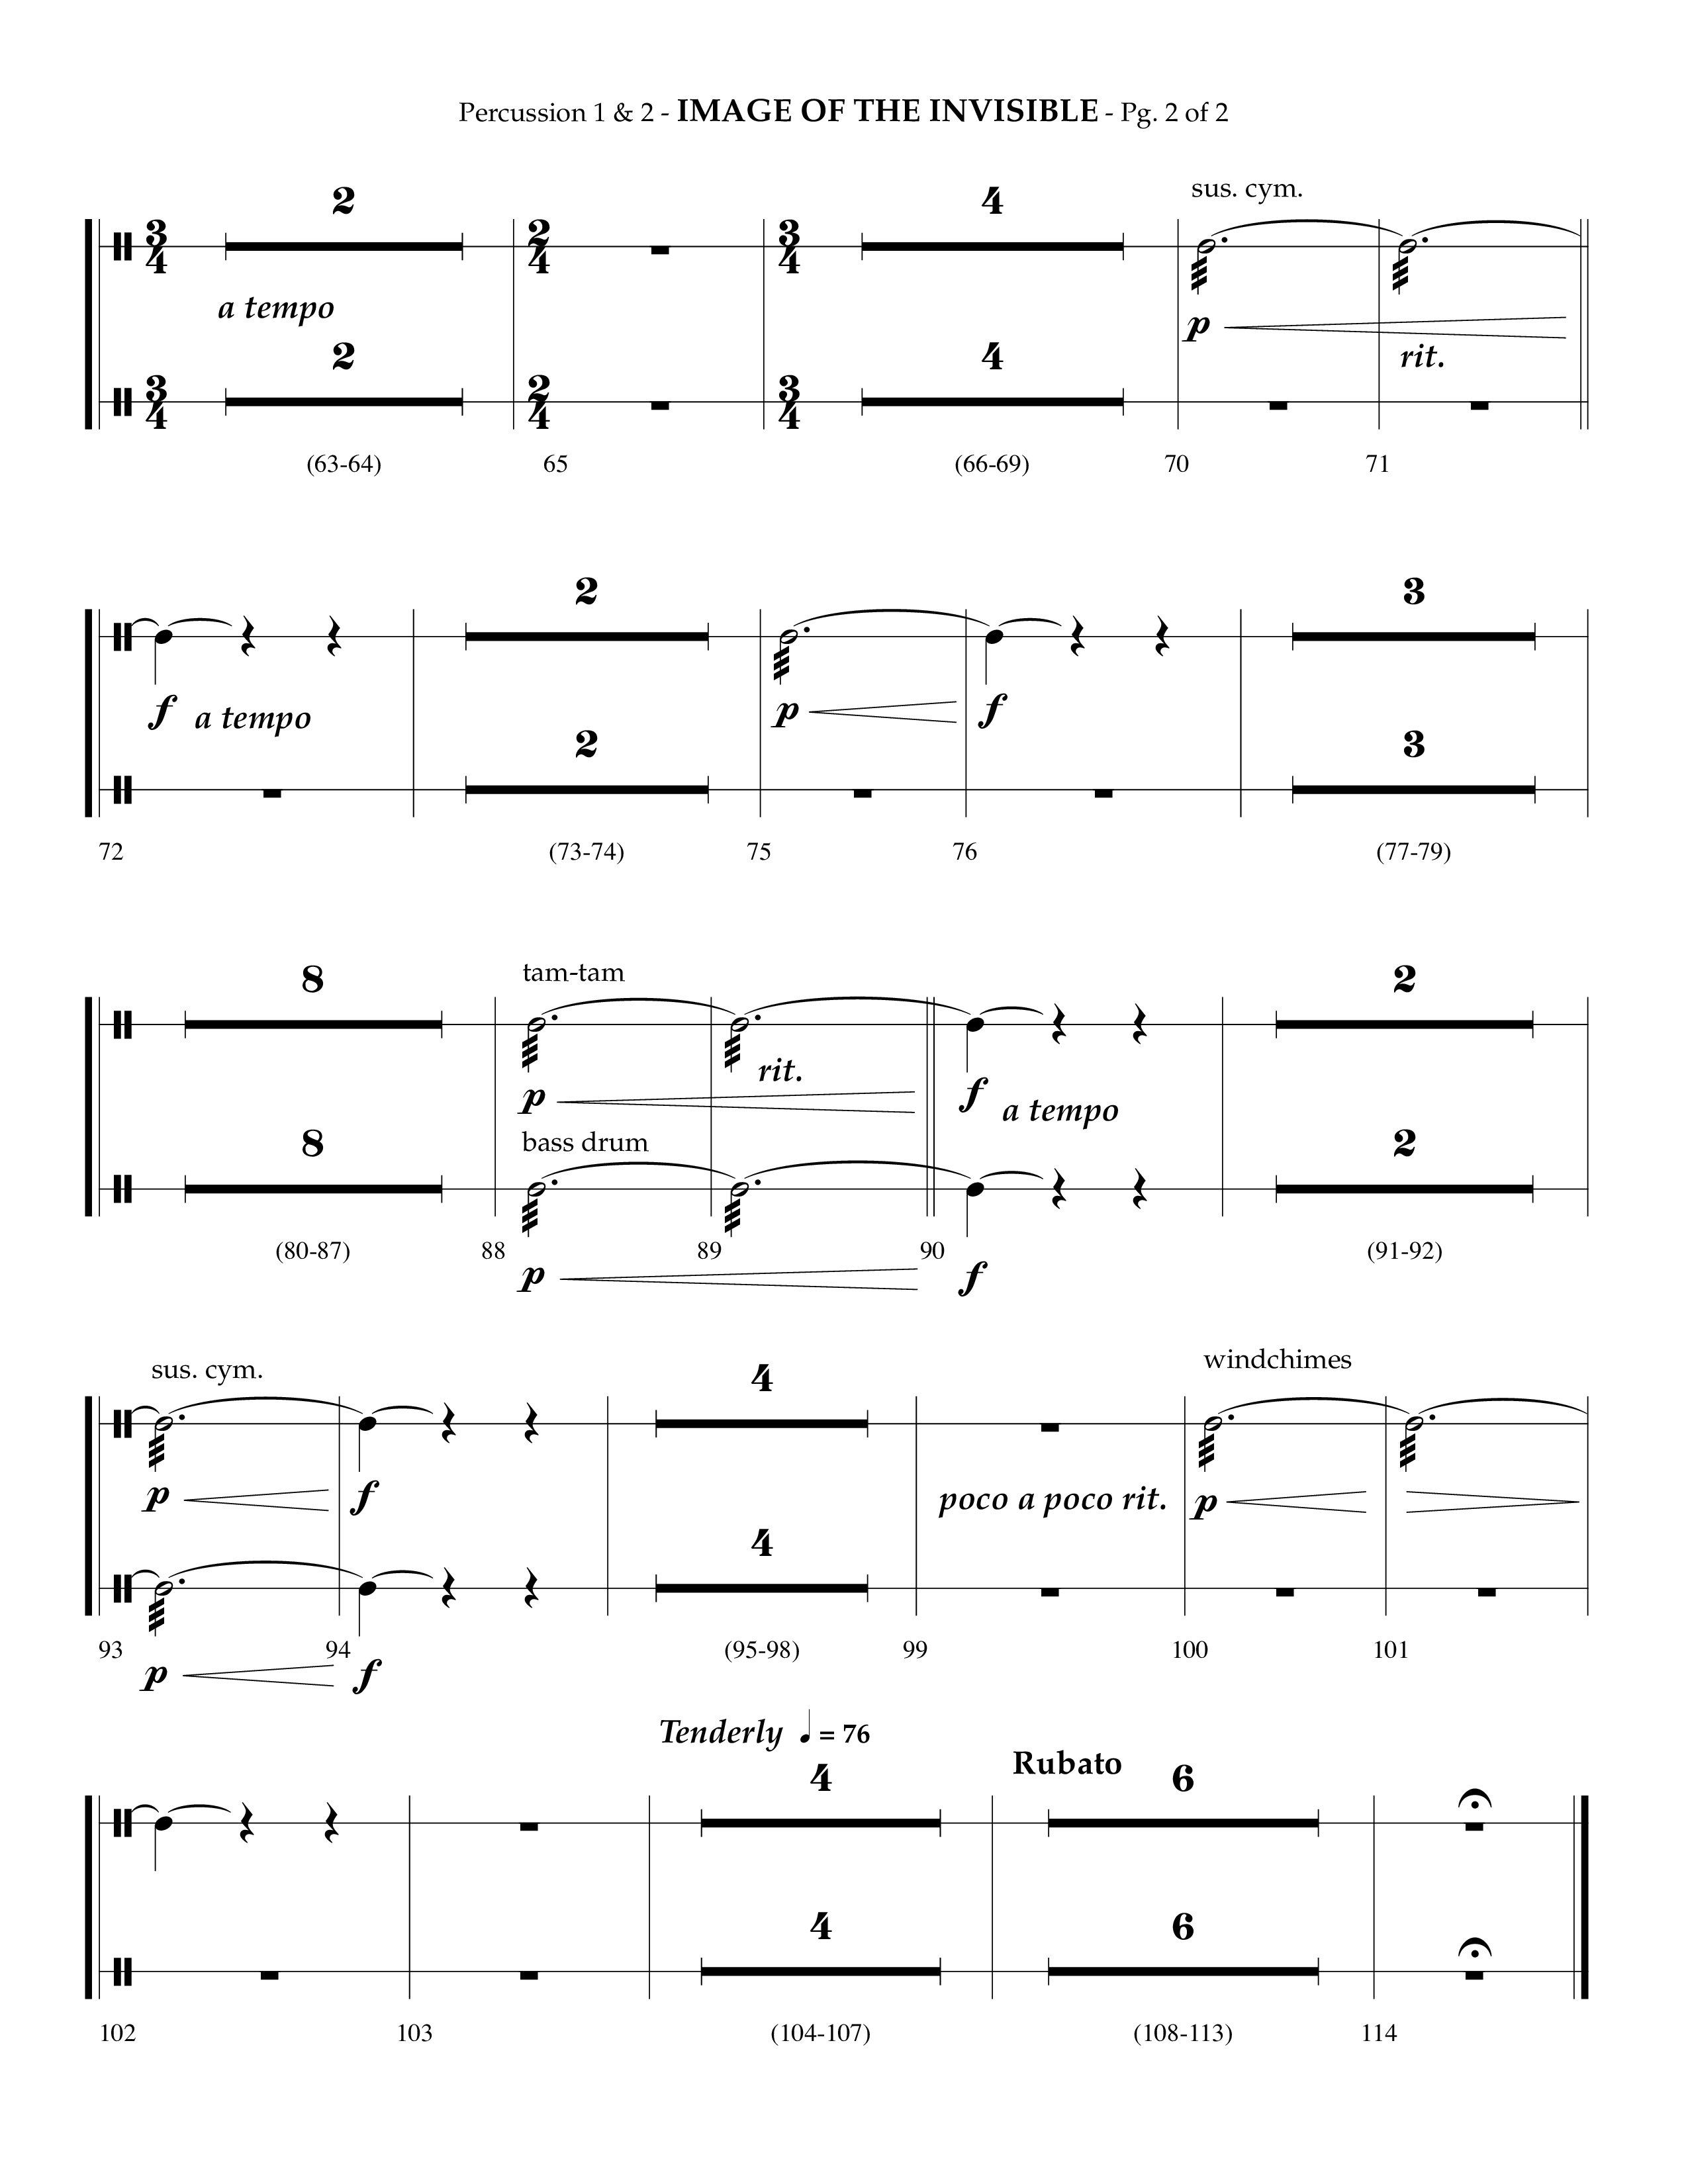 Image Of The Invisible (Choral Anthem SATB) Percussion 1/2 (Lifeway Choral / Arr. Phillip Keveren)